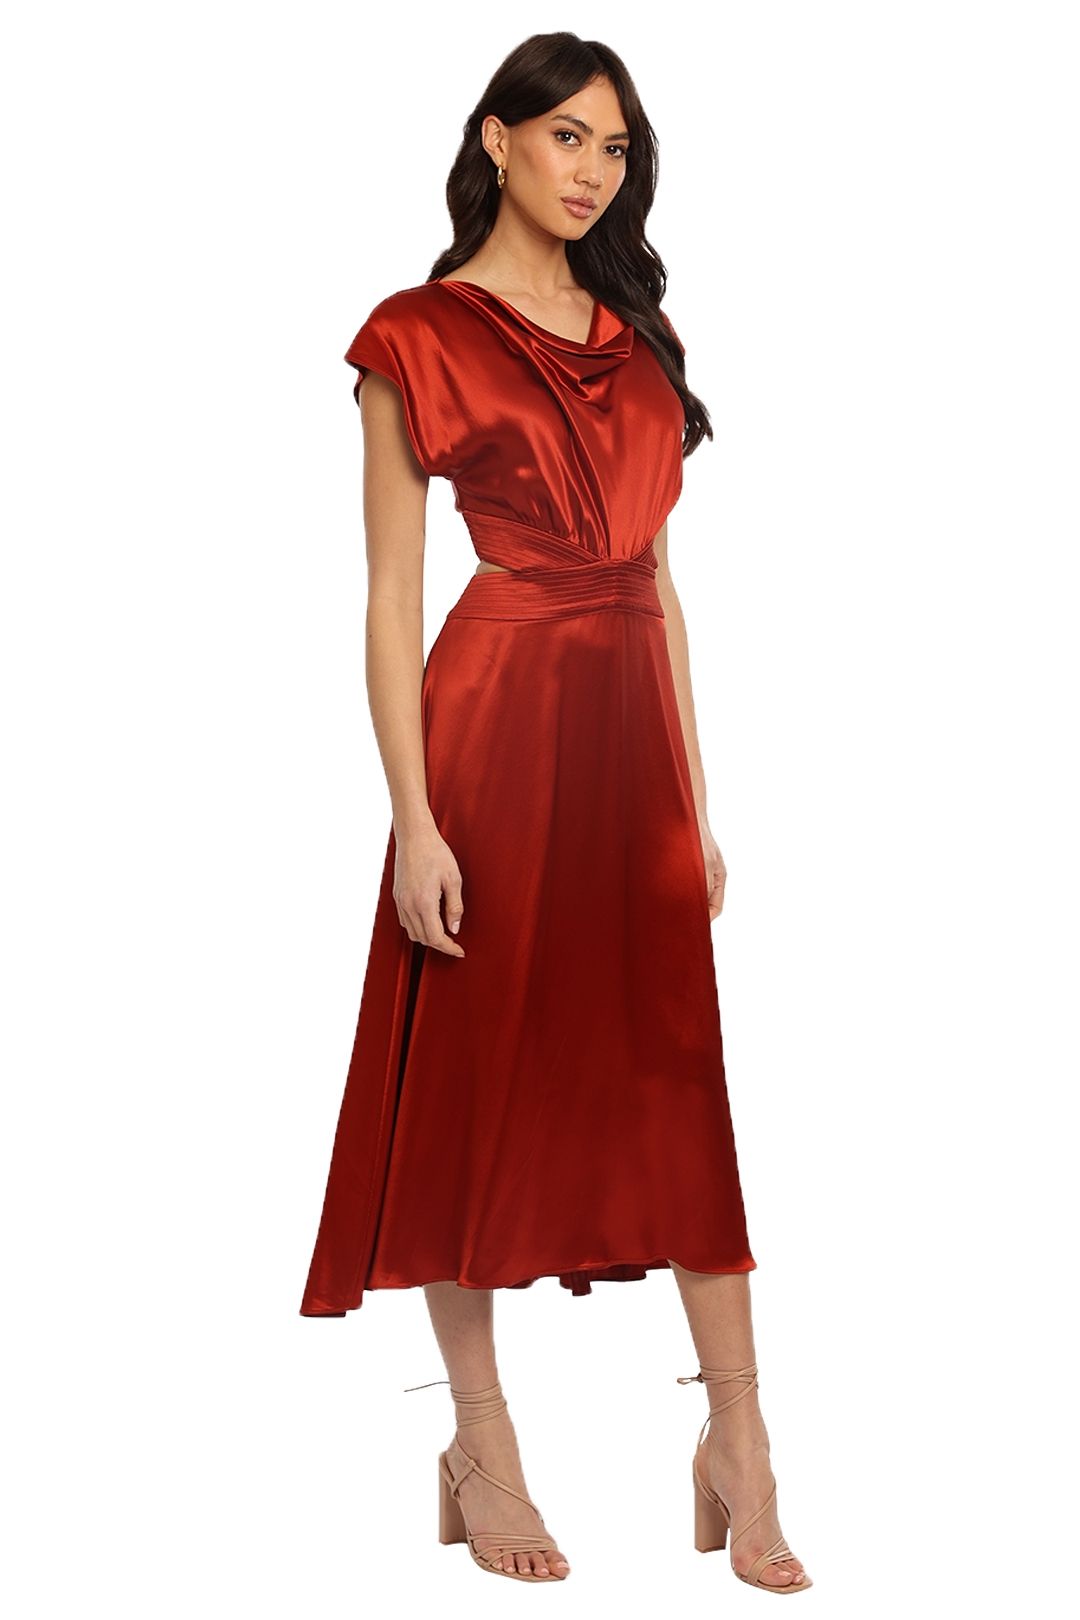 Acler Plympton Dress Red 